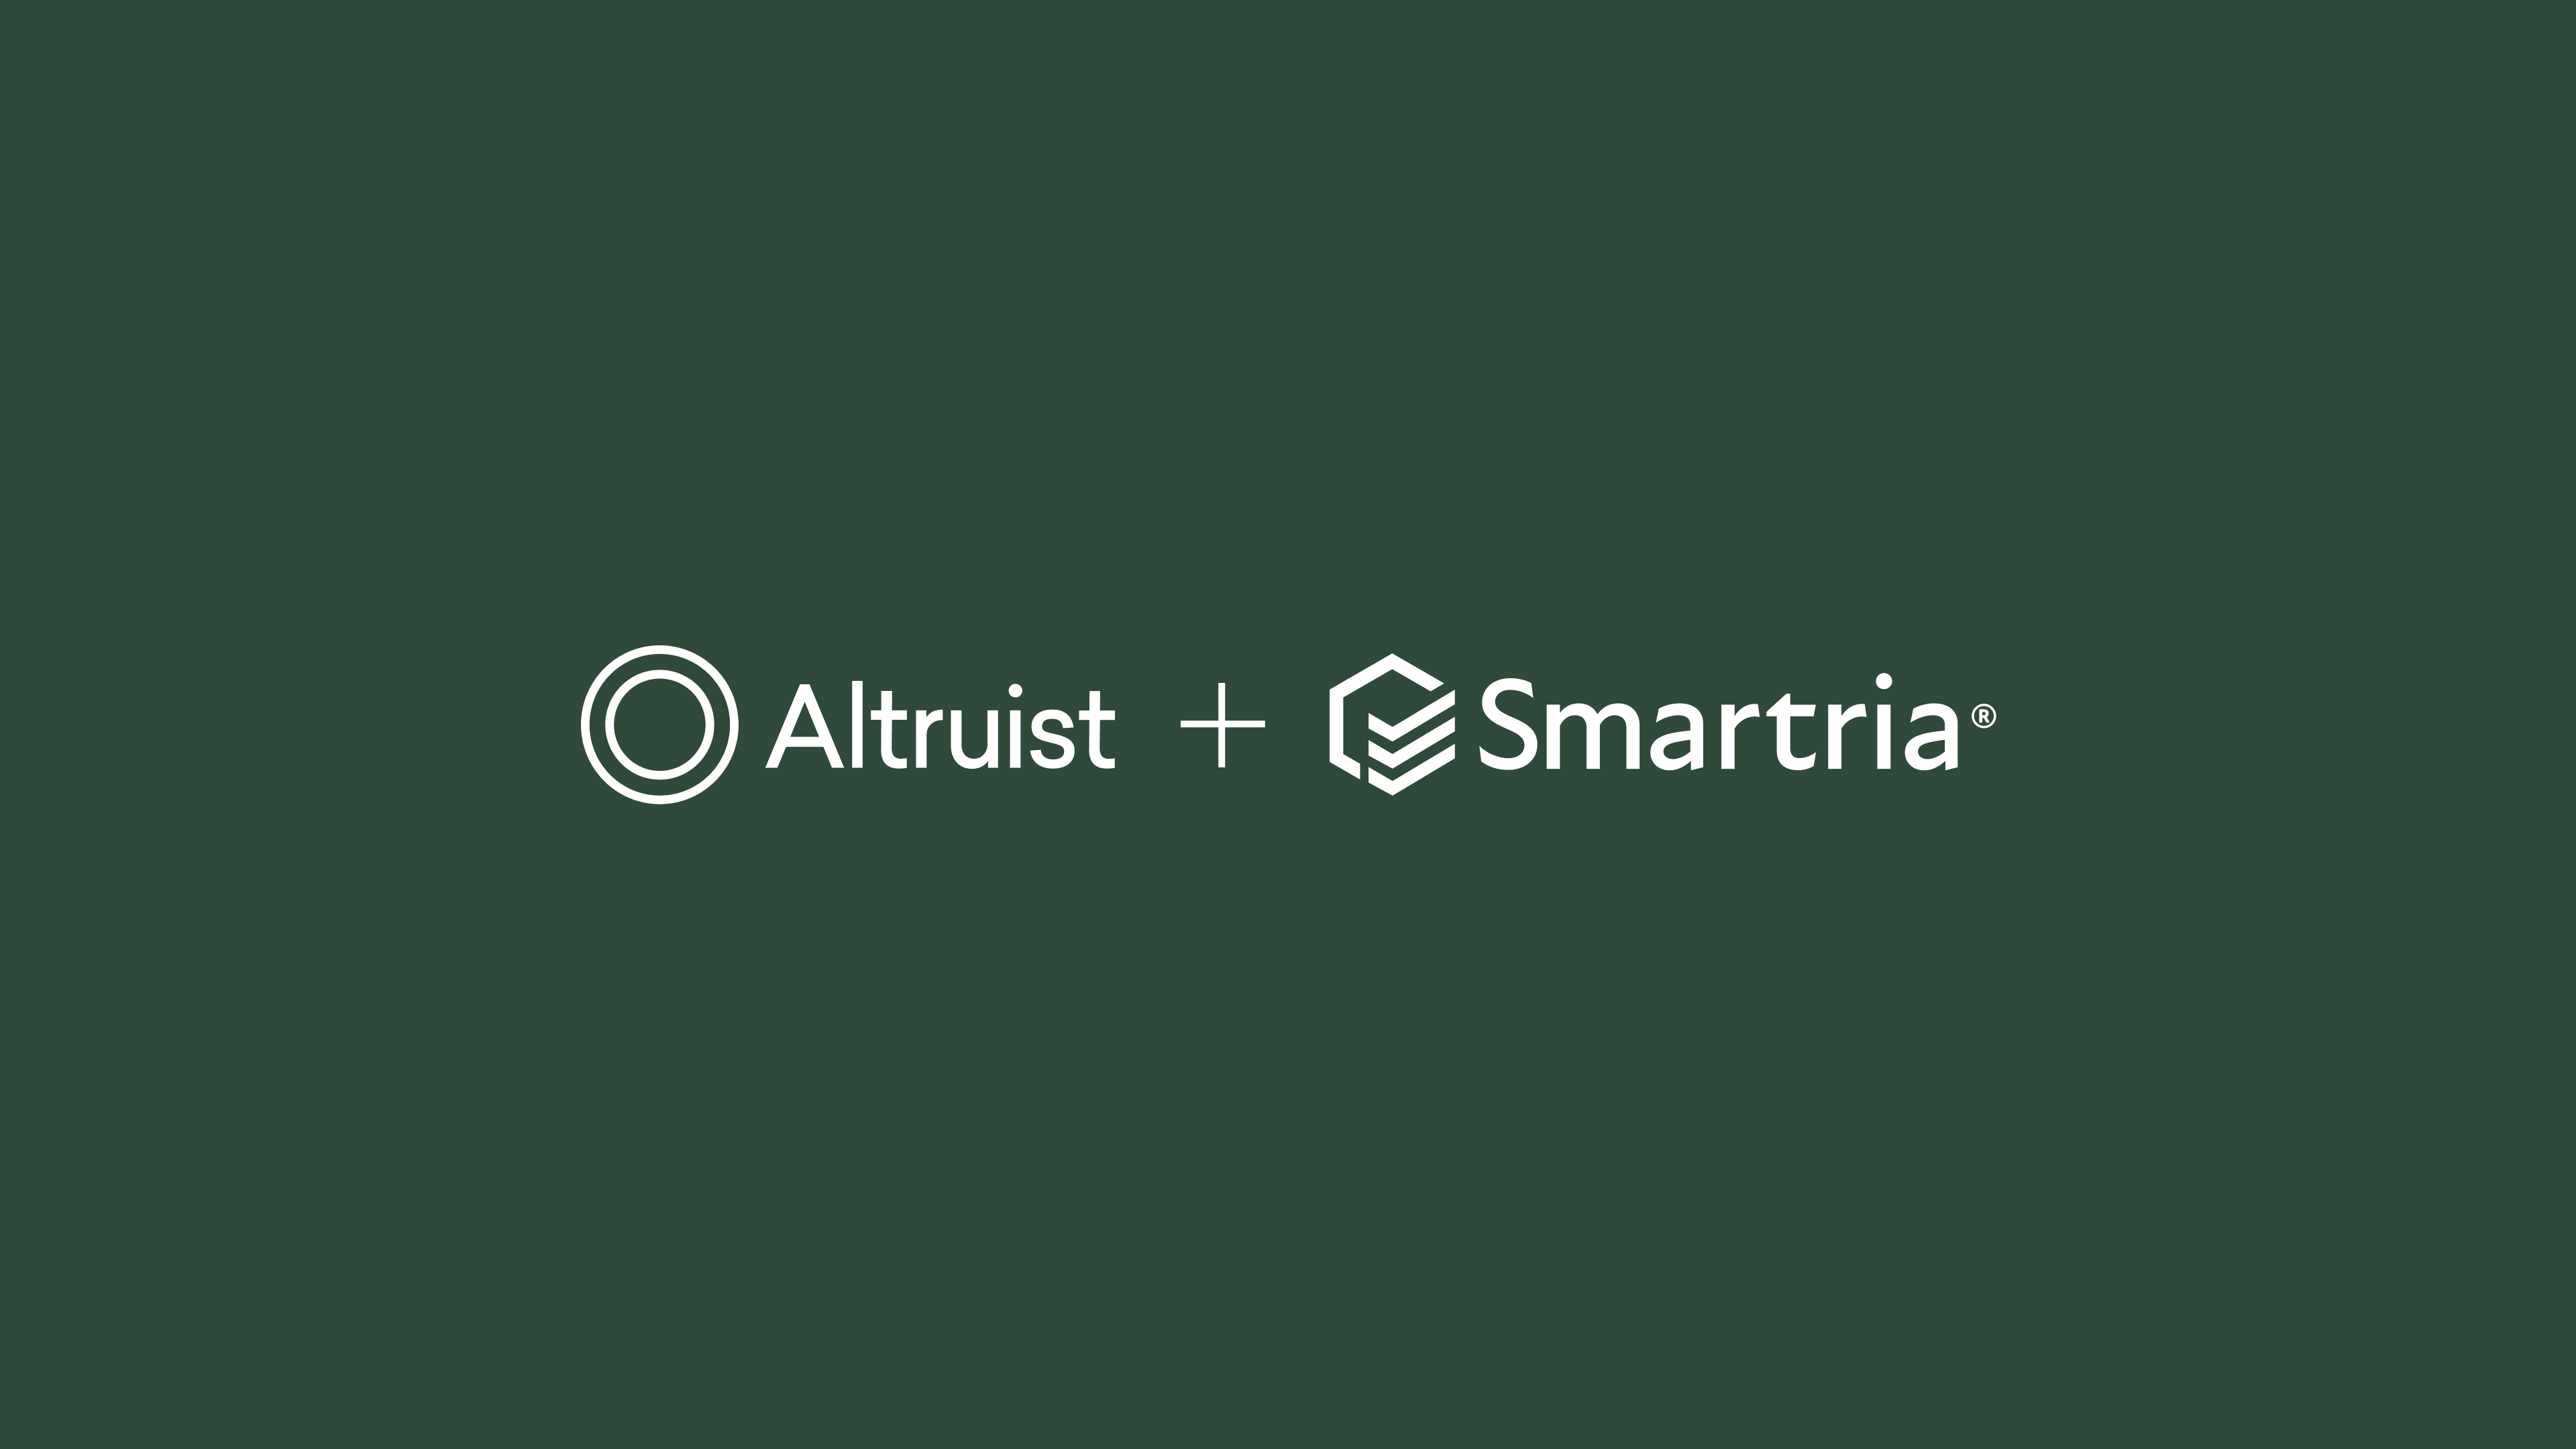 Altruist and Smartria are now integration partners 